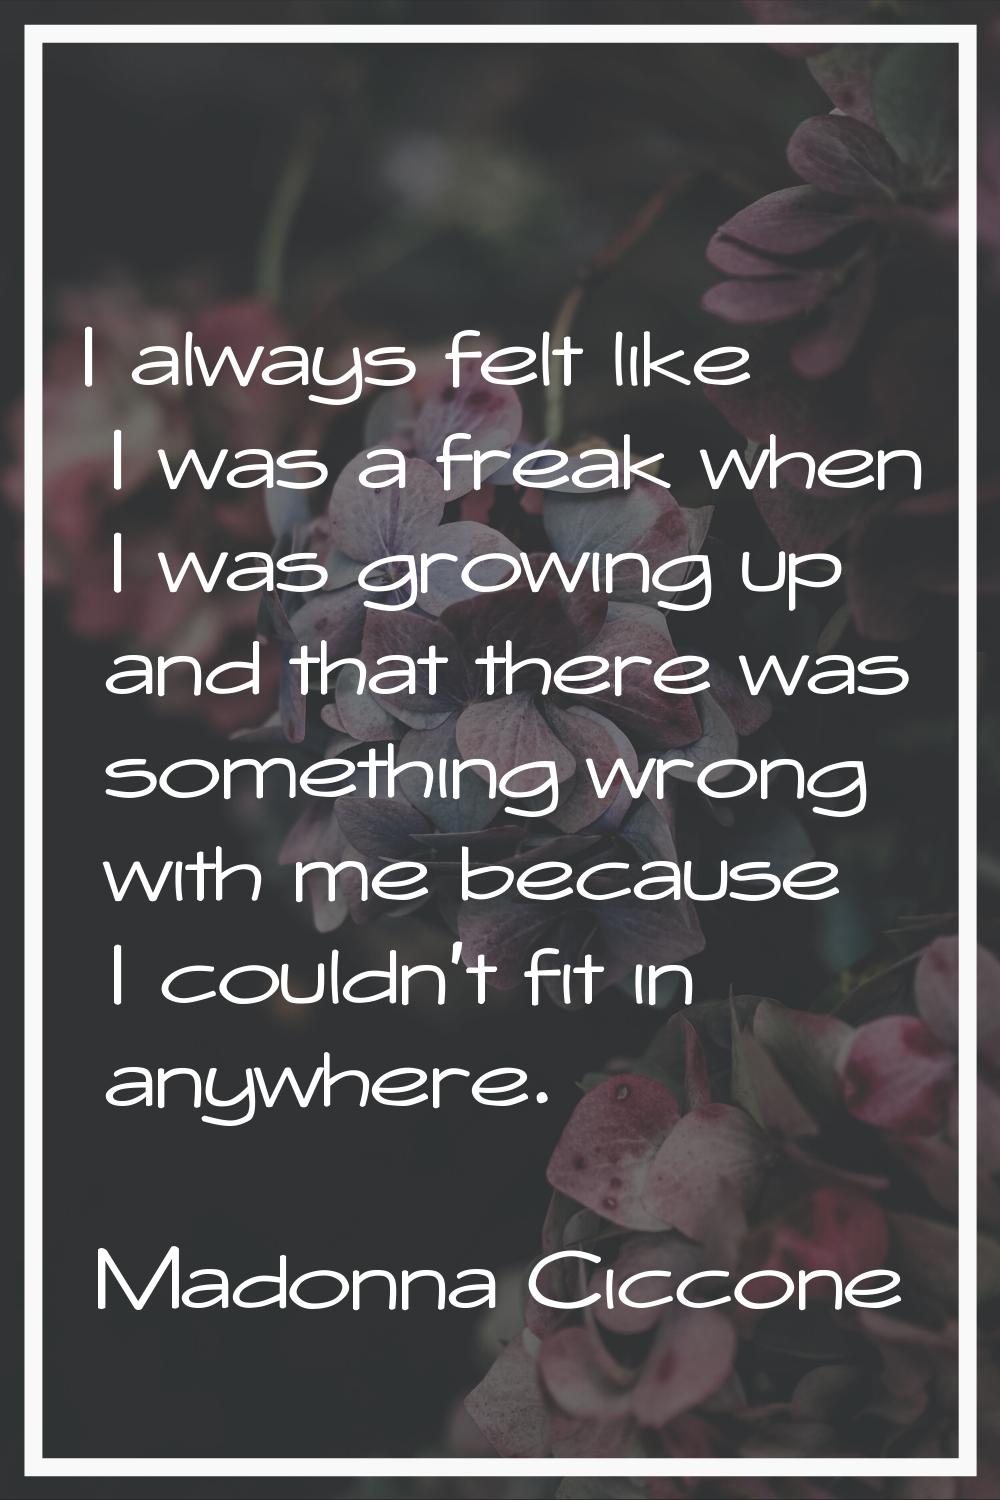 I always felt like I was a freak when I was growing up and that there was something wrong with me b